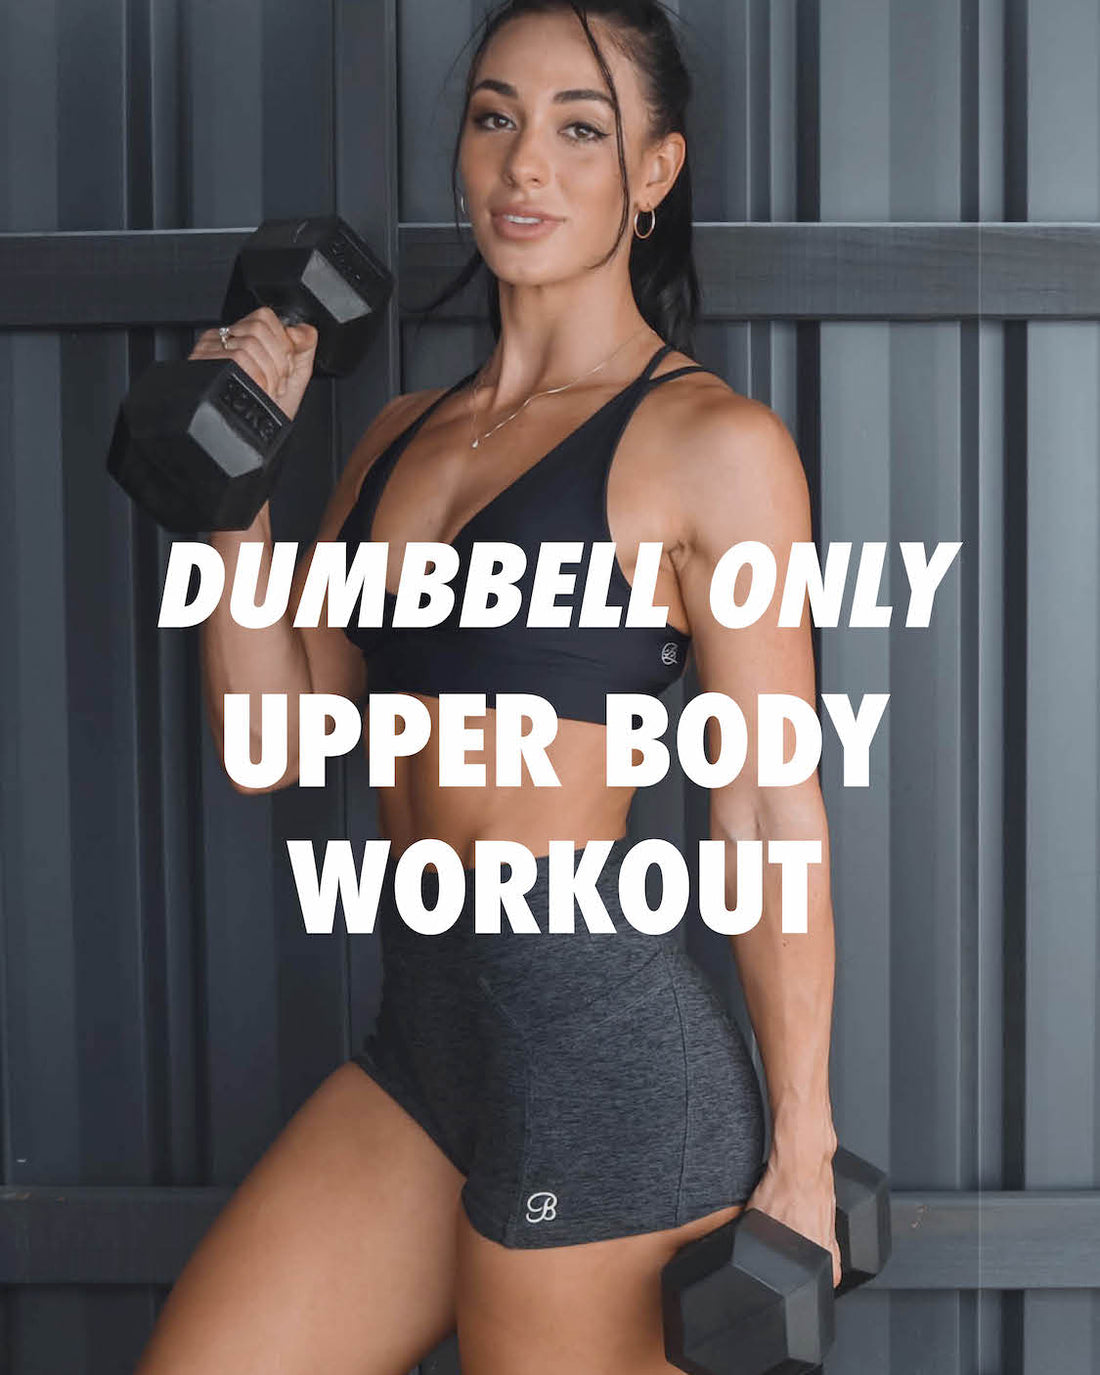 Dumbbell Only Upper Body Workout